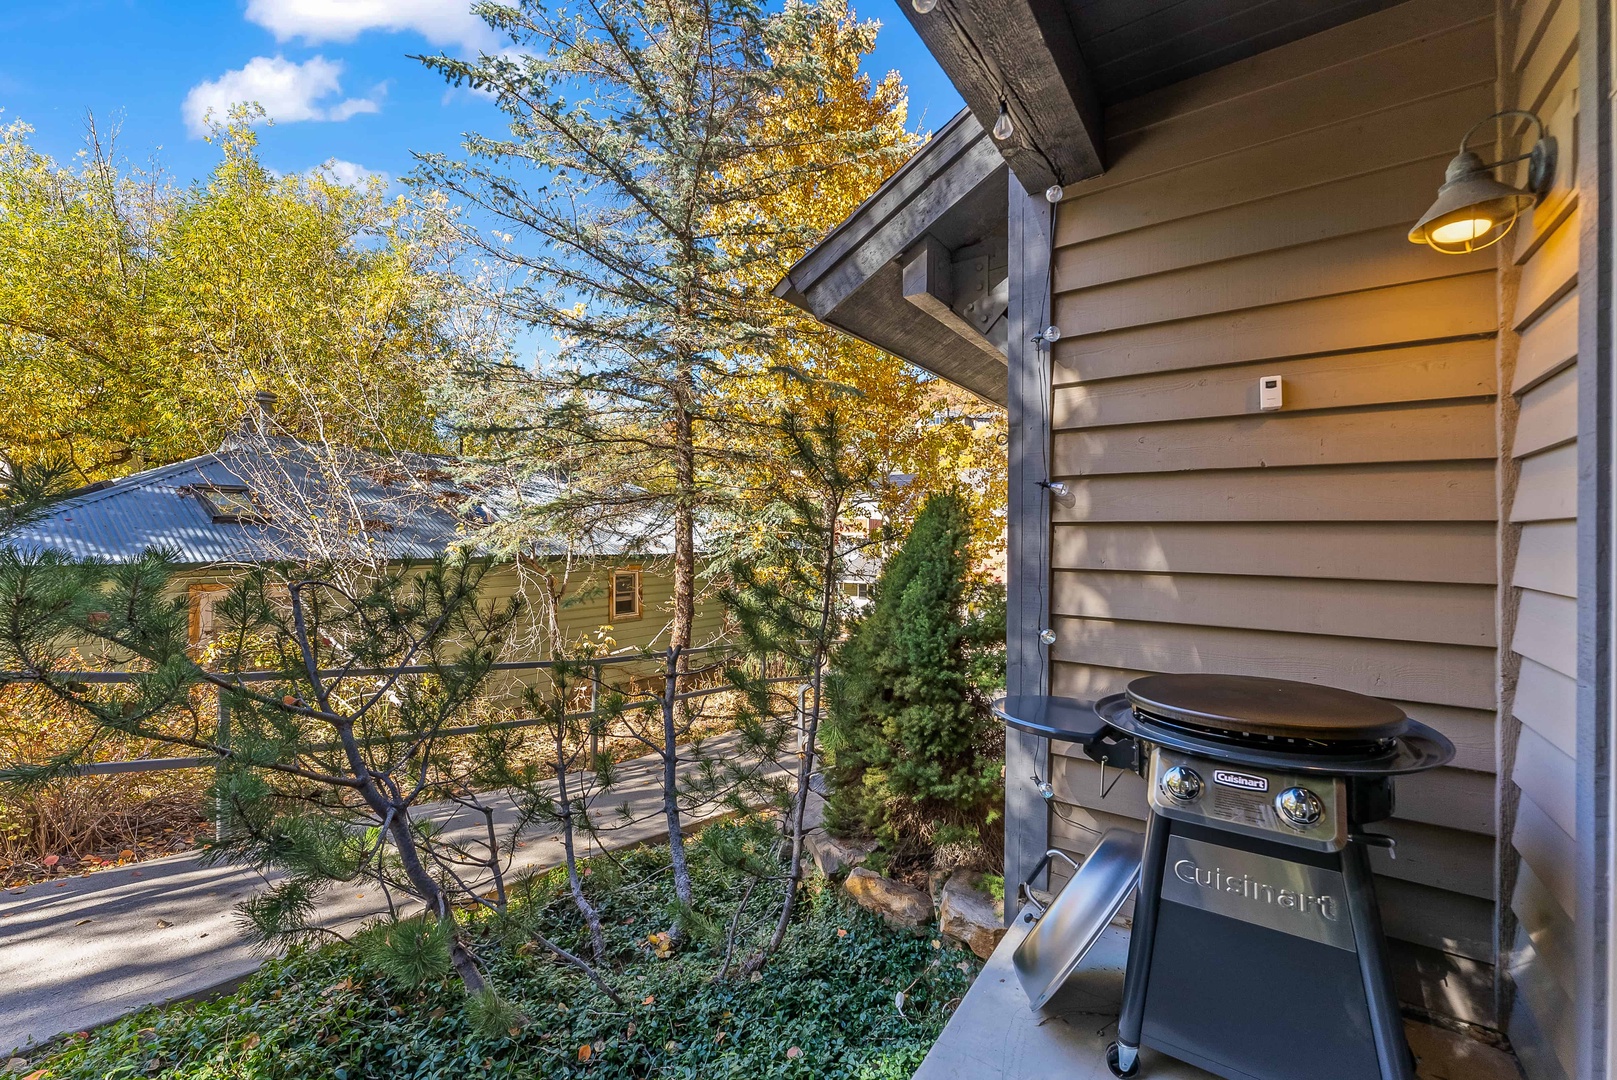 Step outside & enjoy the fresh air while you grill up a feast!